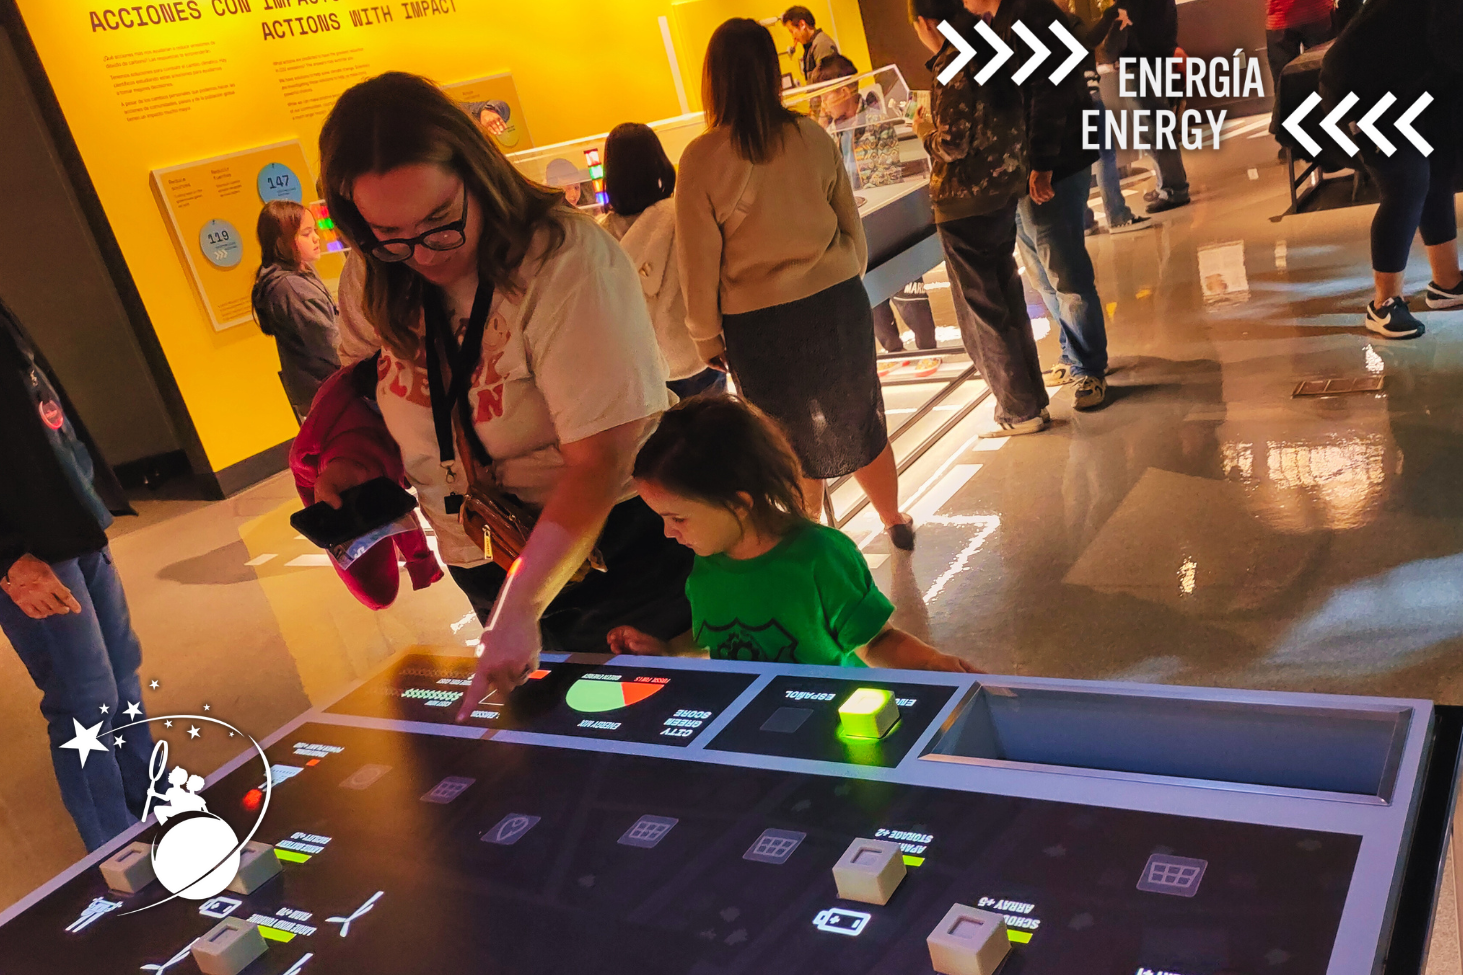 A mother pointing out information on a table to her young daughter at an energy exhibit at the Discovery Children's Museum